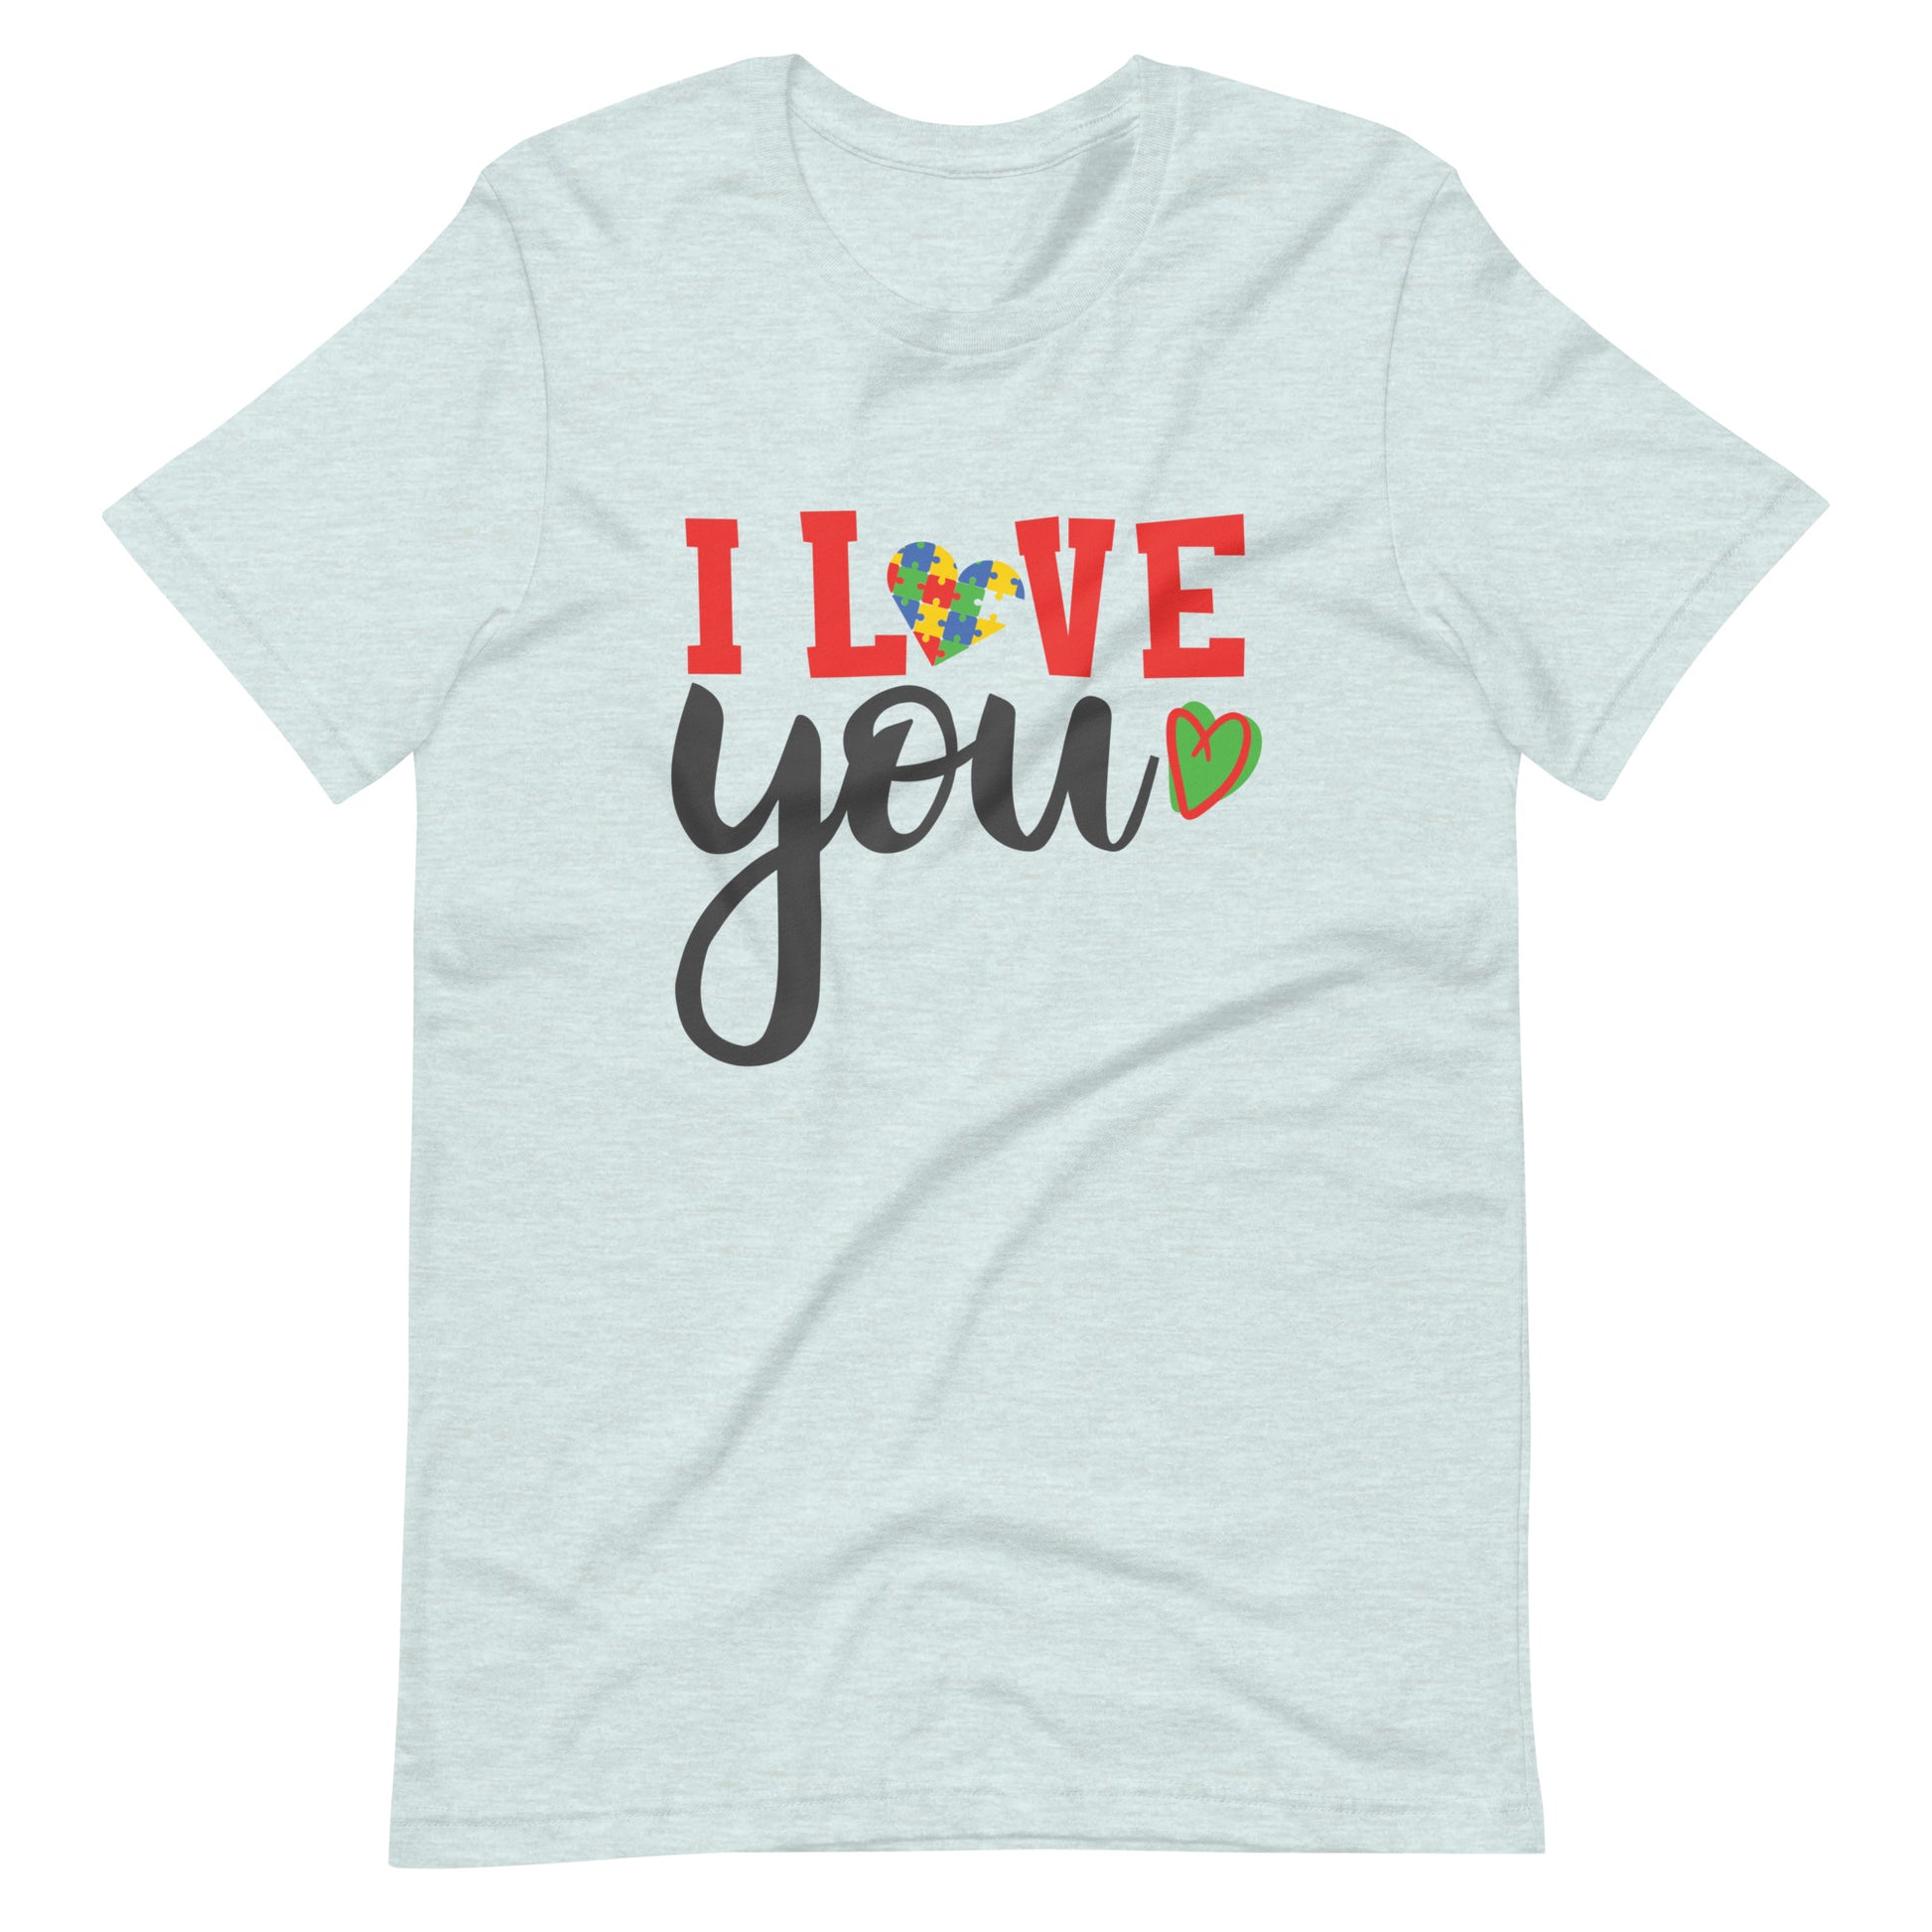 I love you unisex t-shirt The Workout Inspiration